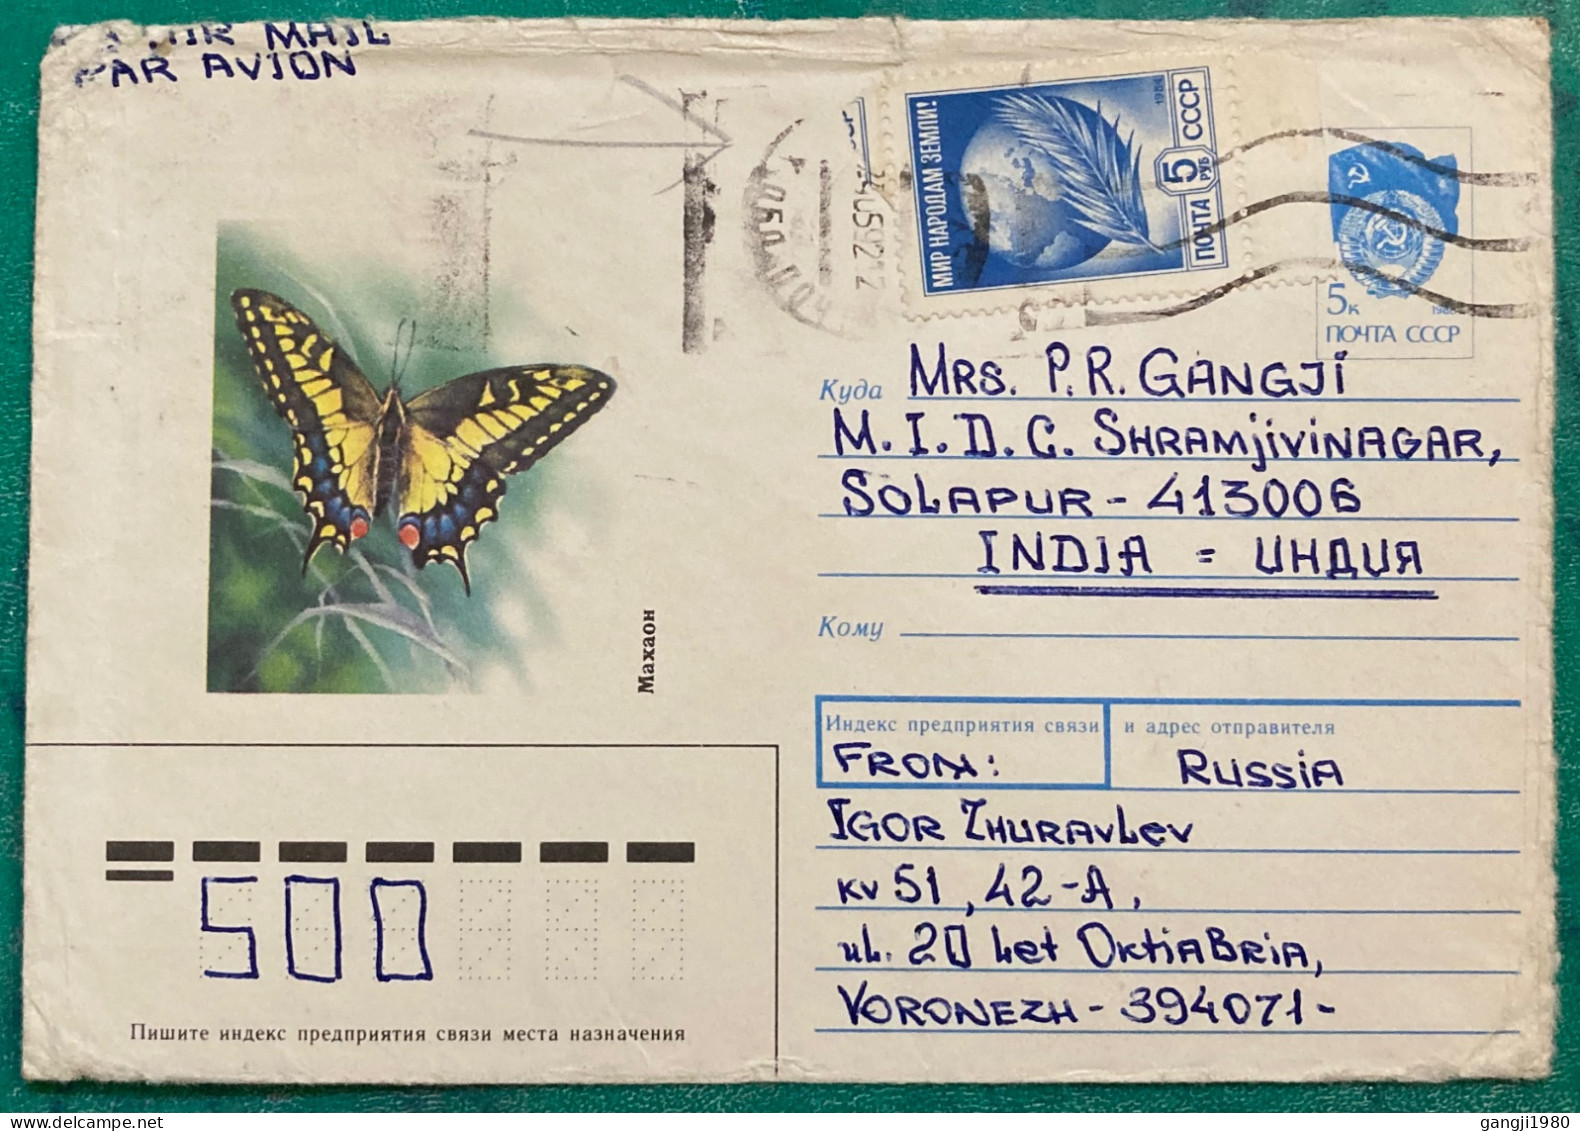 RUSSIA TO INDIA COVER USED 1992, STATIONERY COVER, ILLUSTRATE, BUTTERFLY,  GLOBE & FEATHER, COAT OF ARM FLAG, KORONEZ CI - Covers & Documents